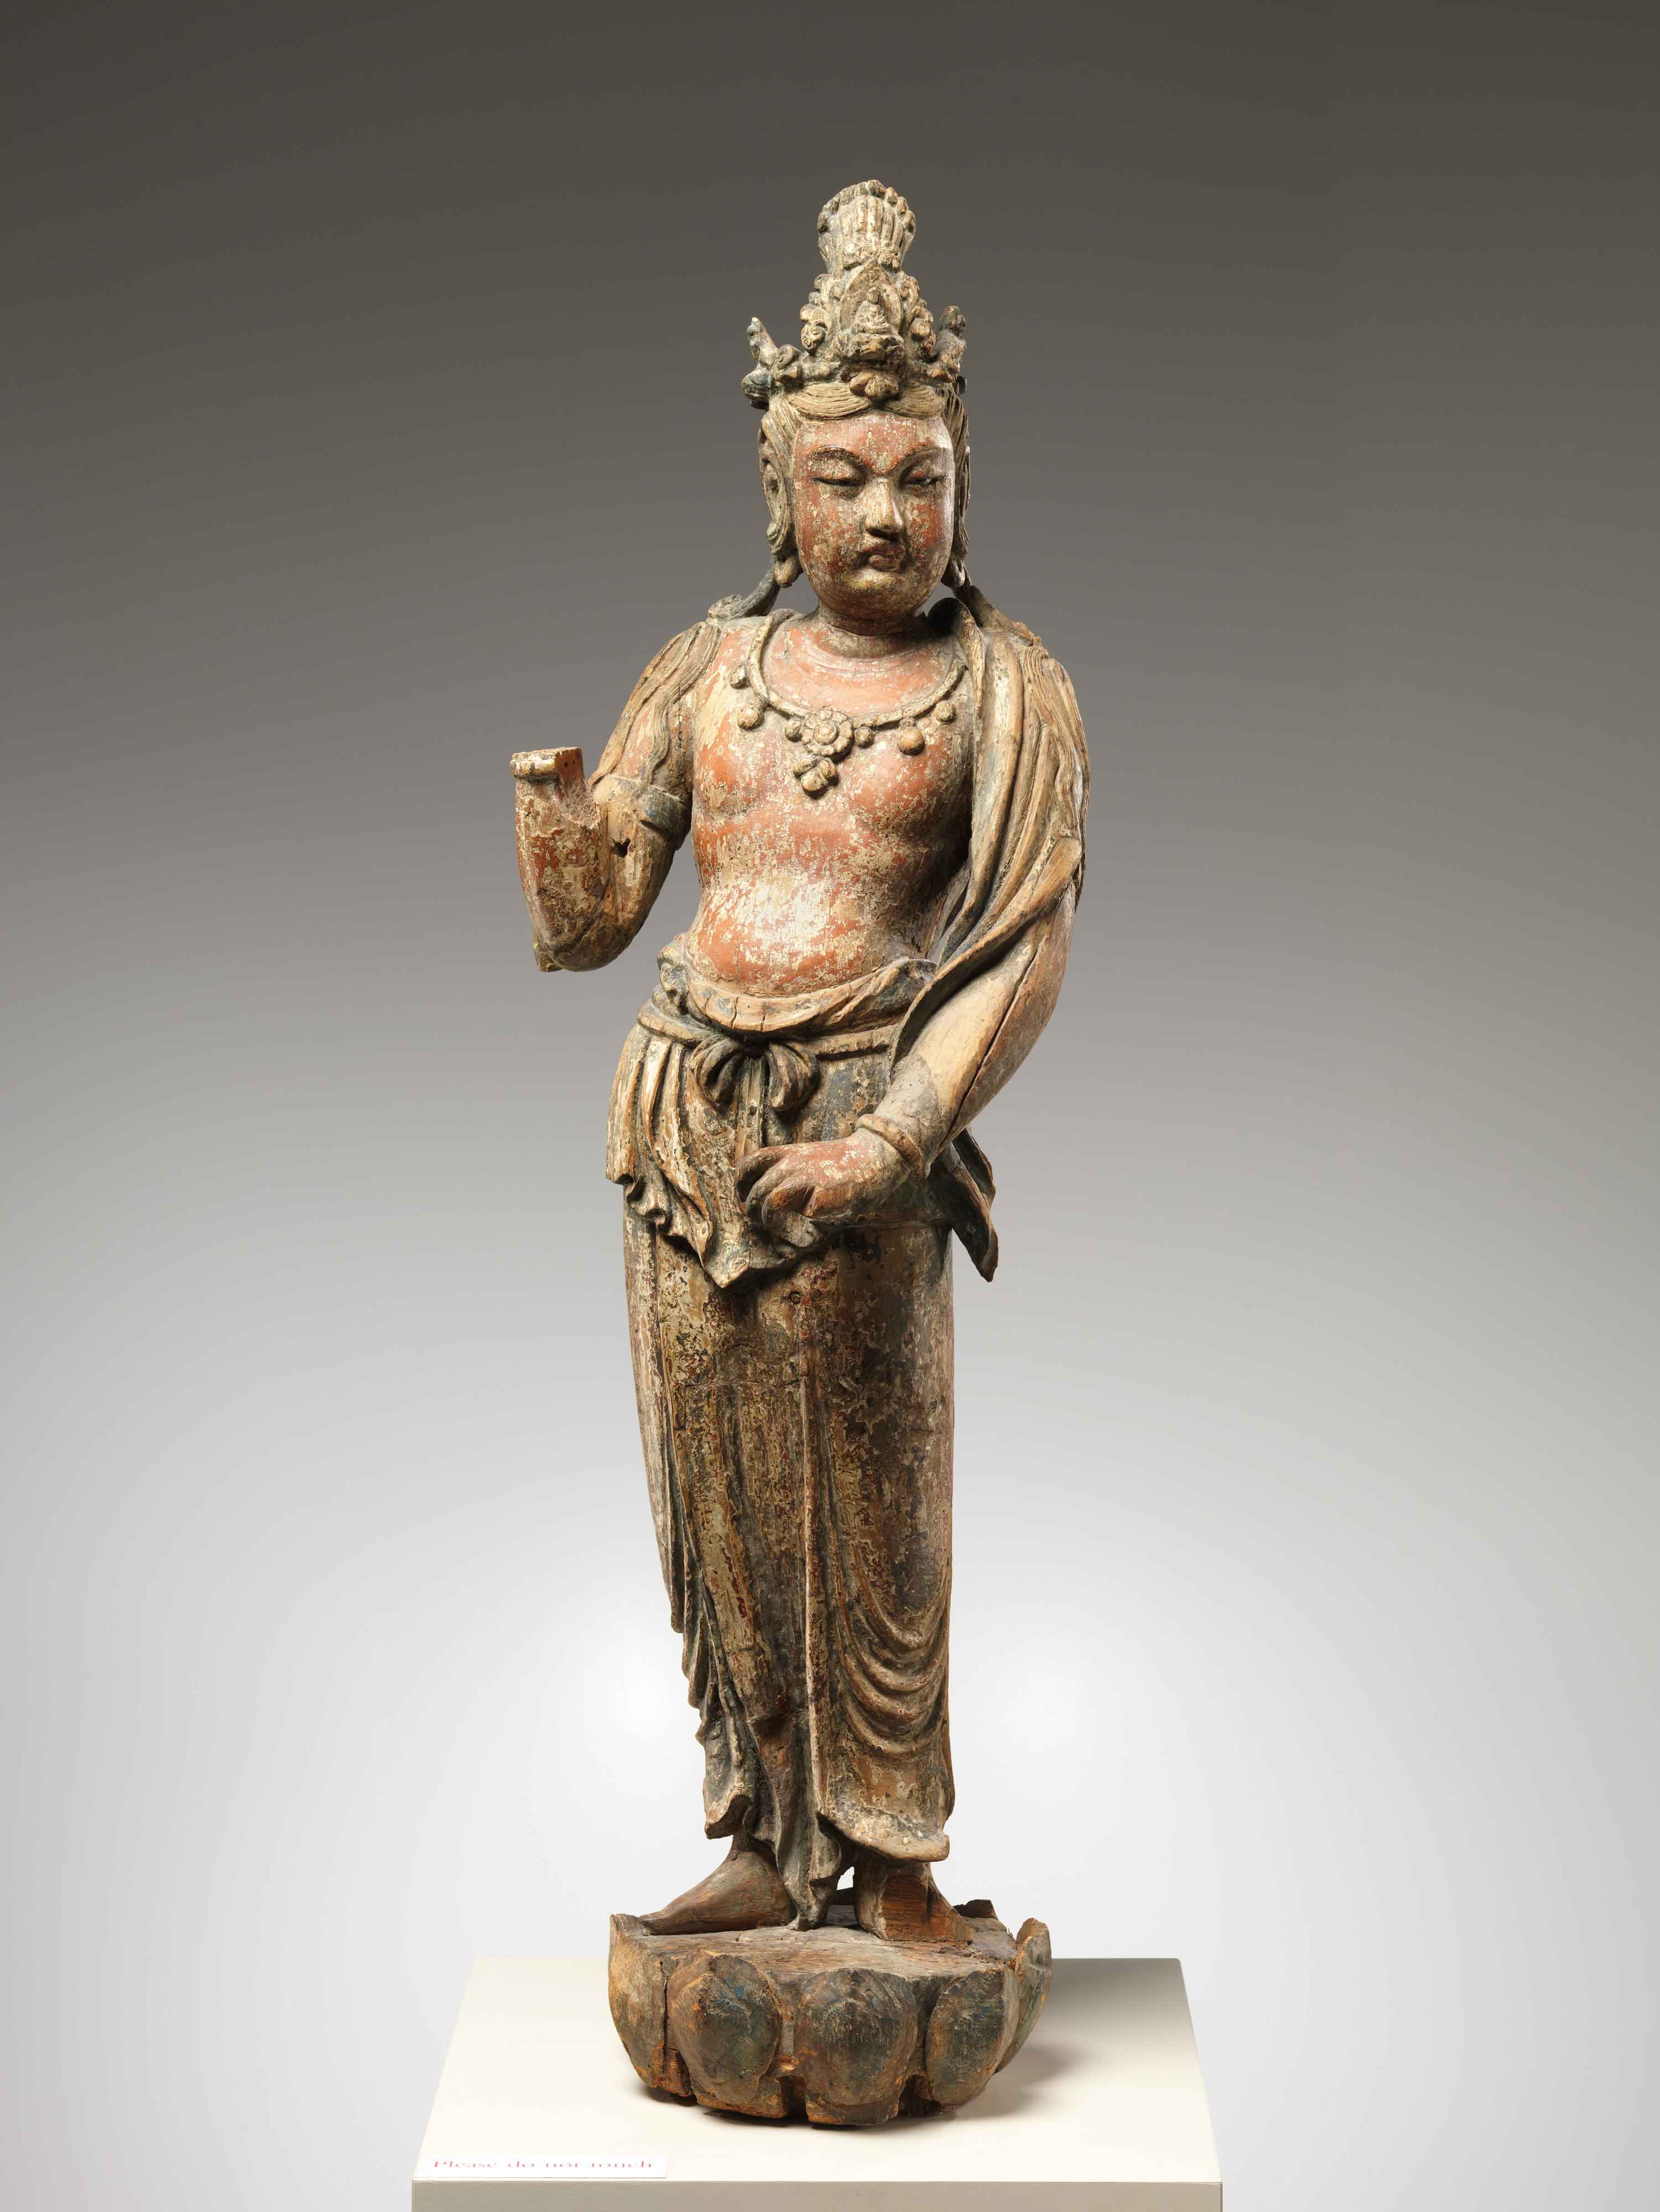 Bodhisattva Avalokiteshvara (Guanyin), 1282, China, Yuan dynasty (1271–1368), wood with traces of pigment, 39 1/4 in. (99.7 cm). The Metropolitan Museum of Art. Purchase, Joseph Pulitzer Bequest, 1934, 34.15.1a, b